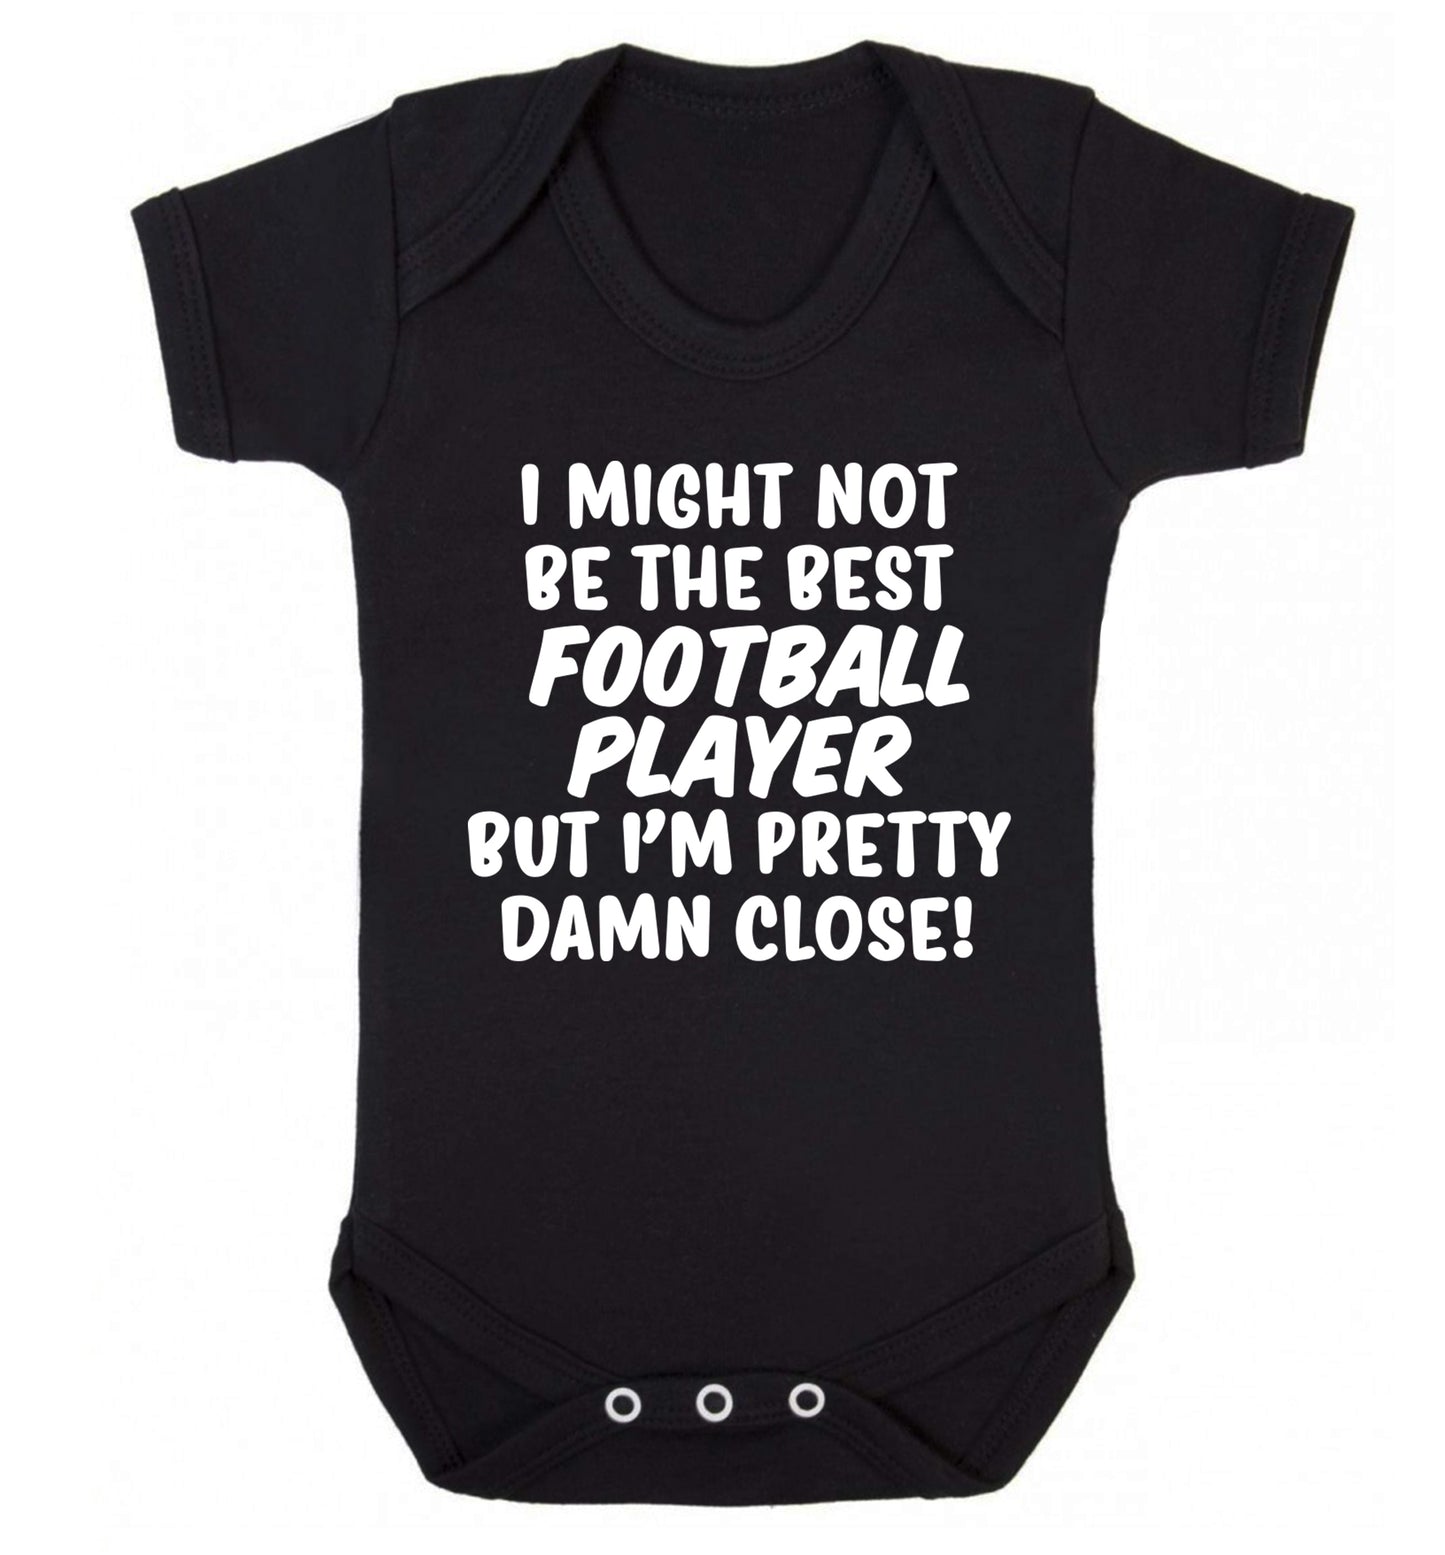 I might not be the best football player but I'm pretty close! Baby Vest black 18-24 months